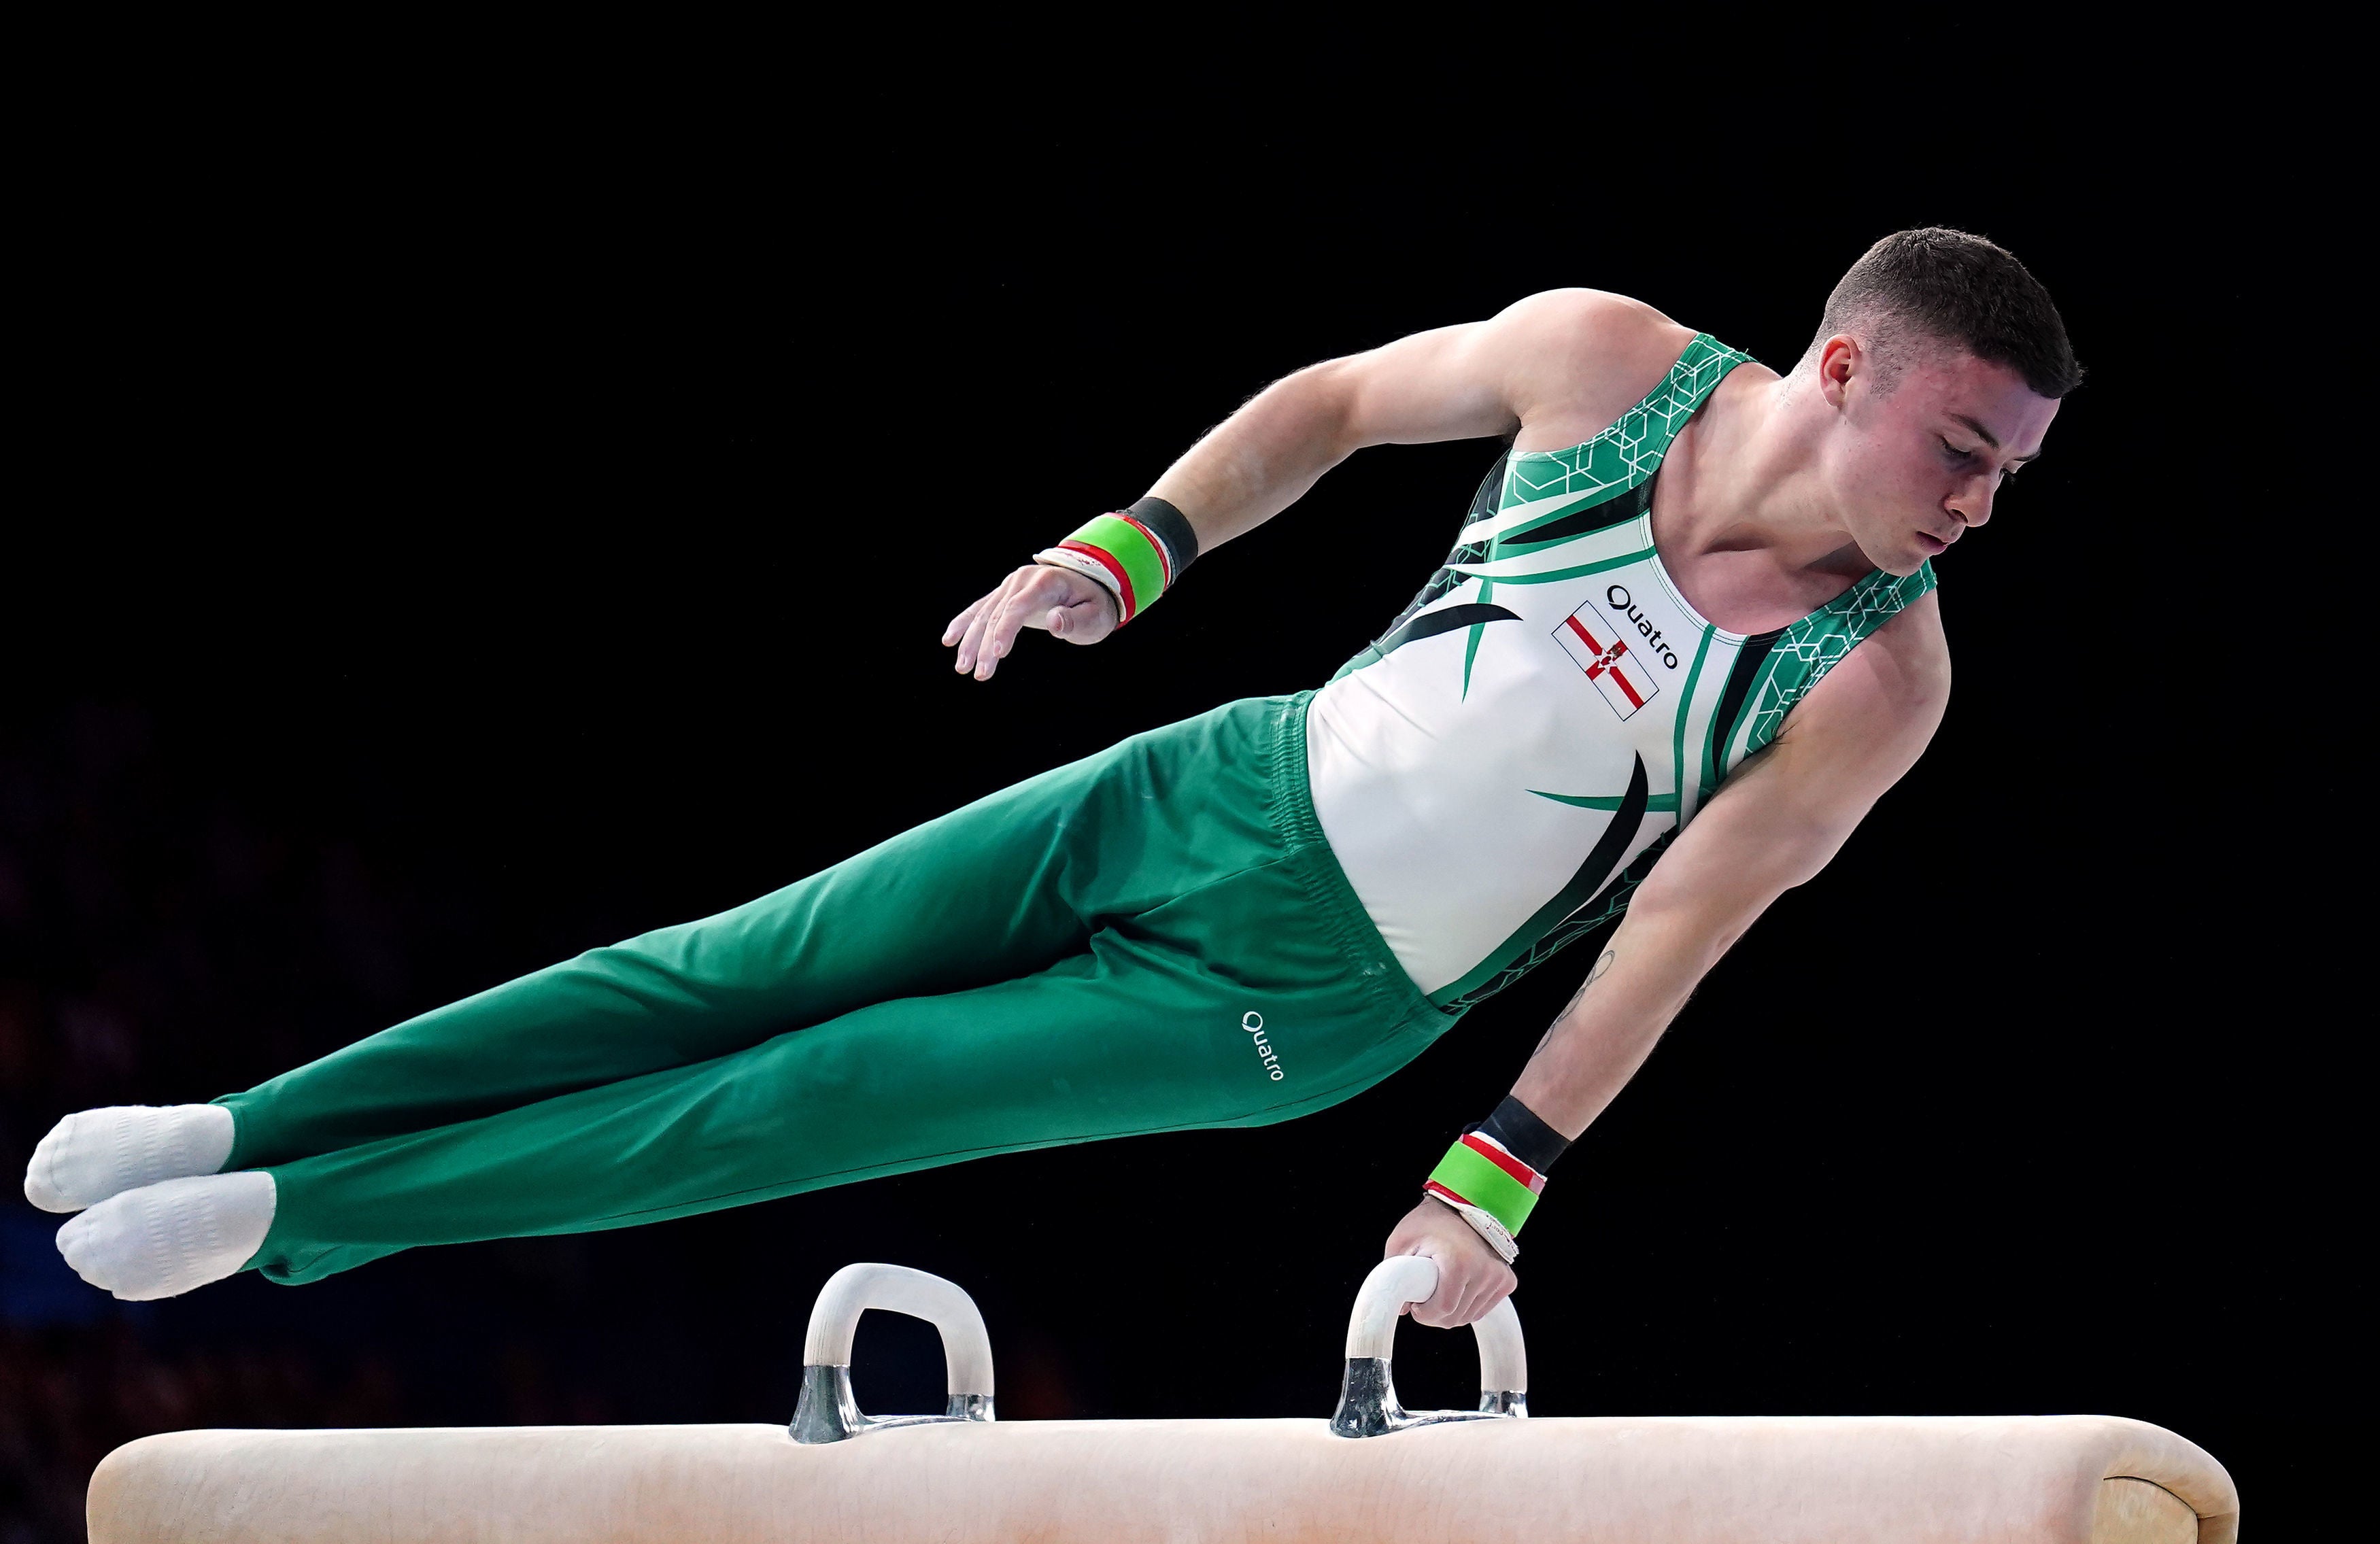 Rhys McClenaghan competes in the Men's Pommel Horse Final